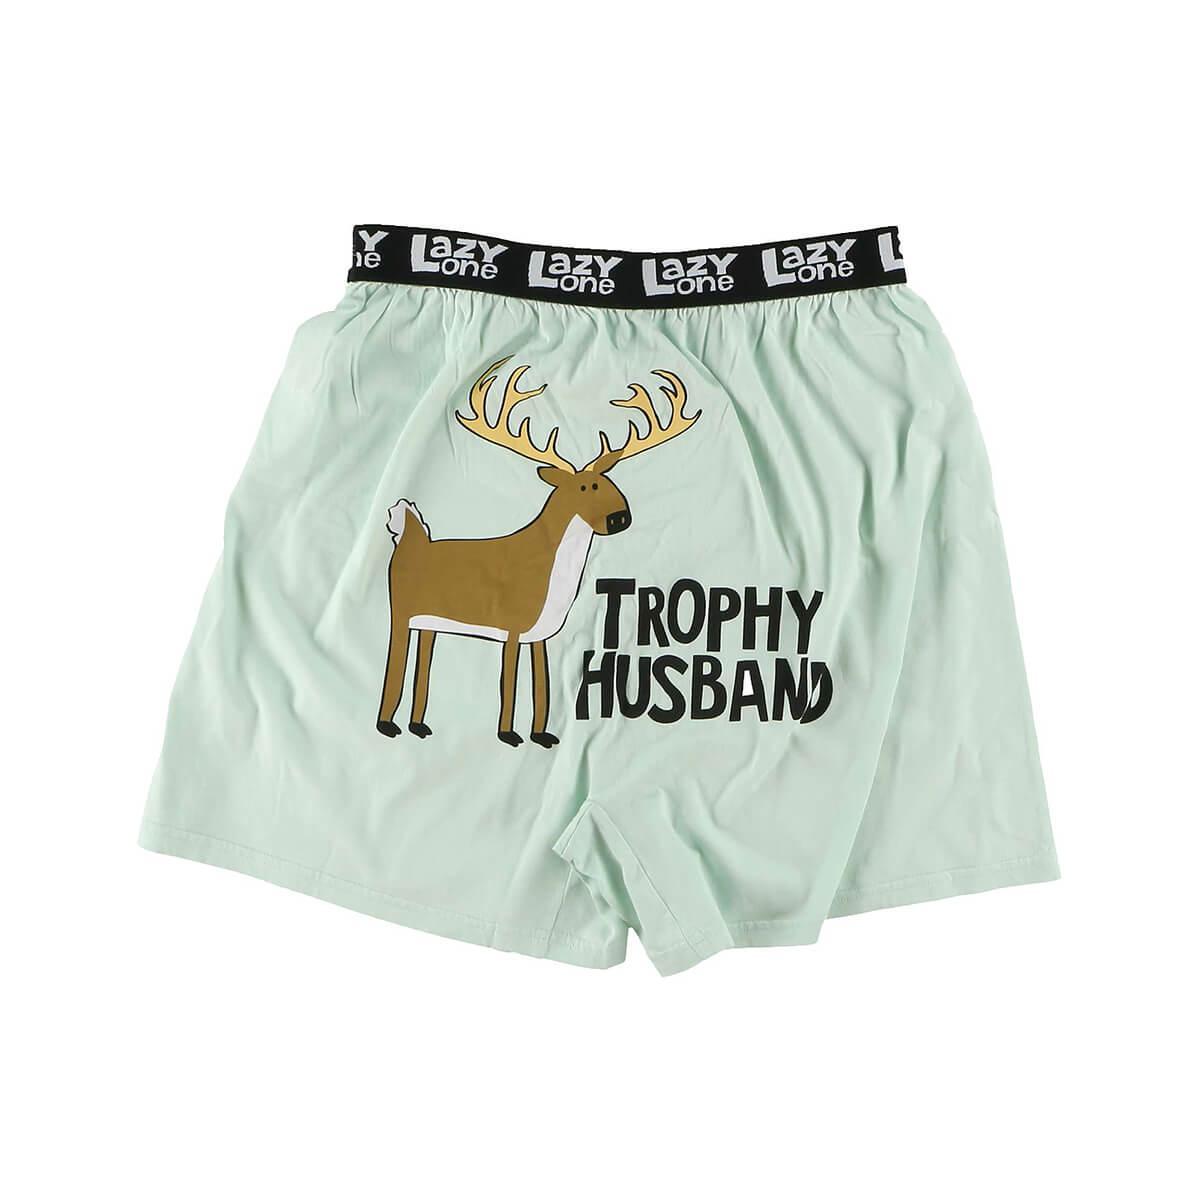 White Married and Merry Men's Cotton Undies - Flash You And Me